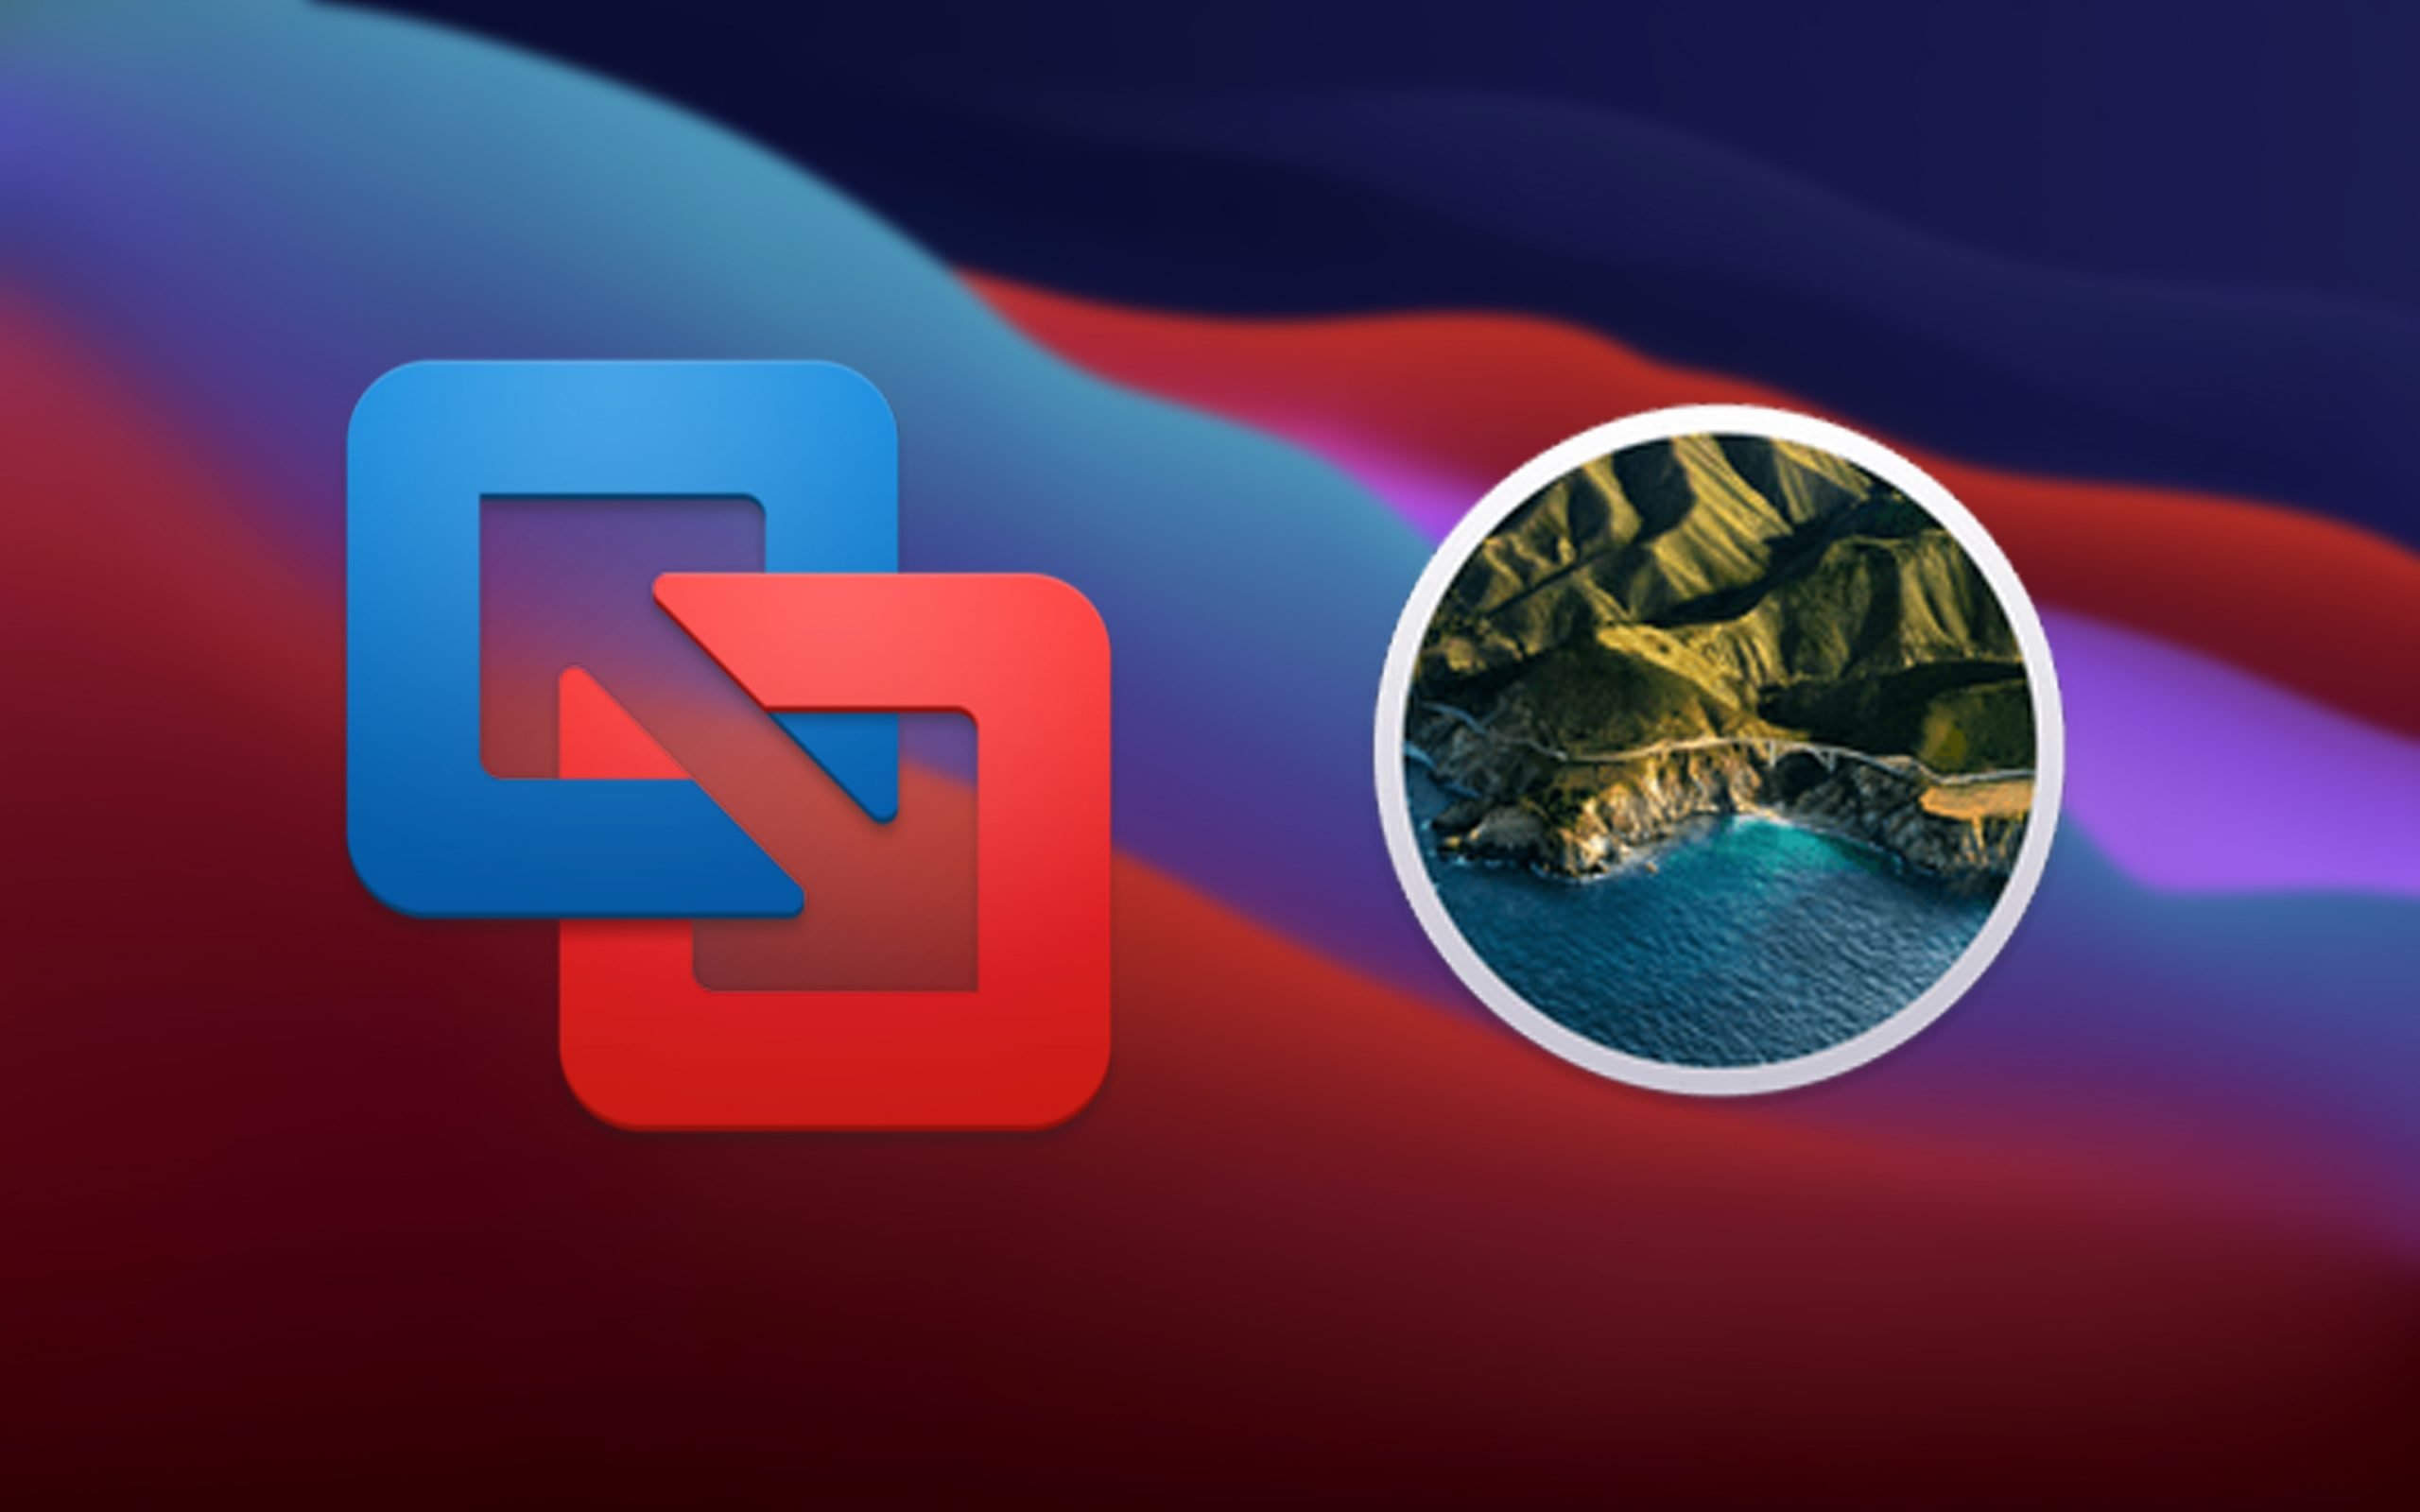 How to Install VMware Fusion on macOS Big Sur 11